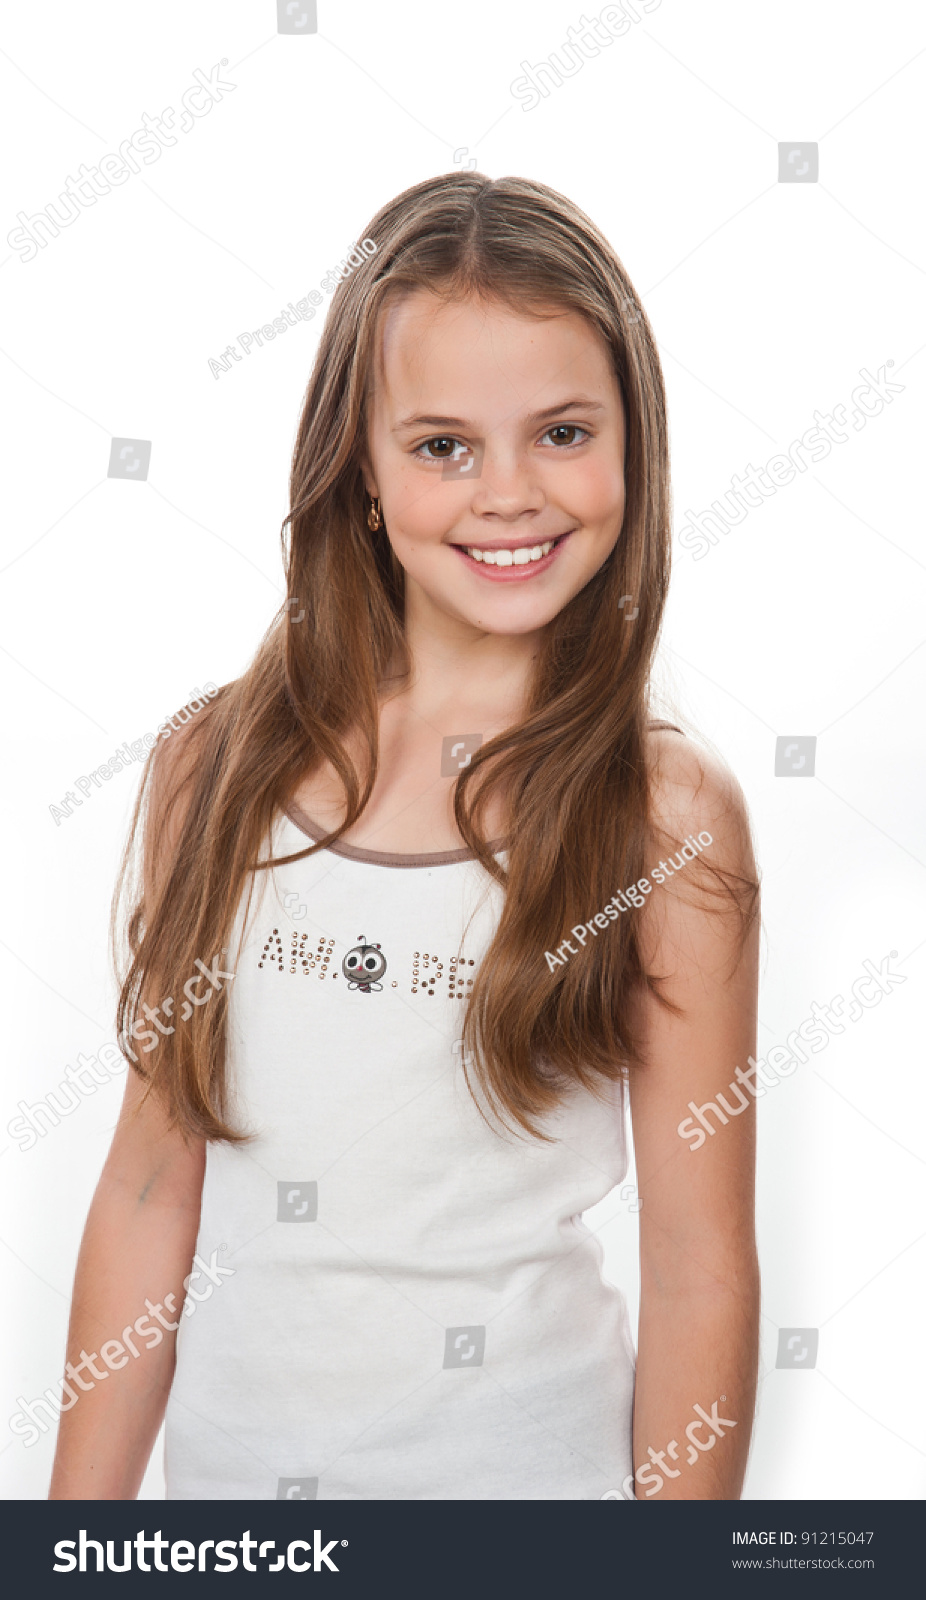 Young Young Girl Child Beautifully Smiling Stock Photo 91215047 ...